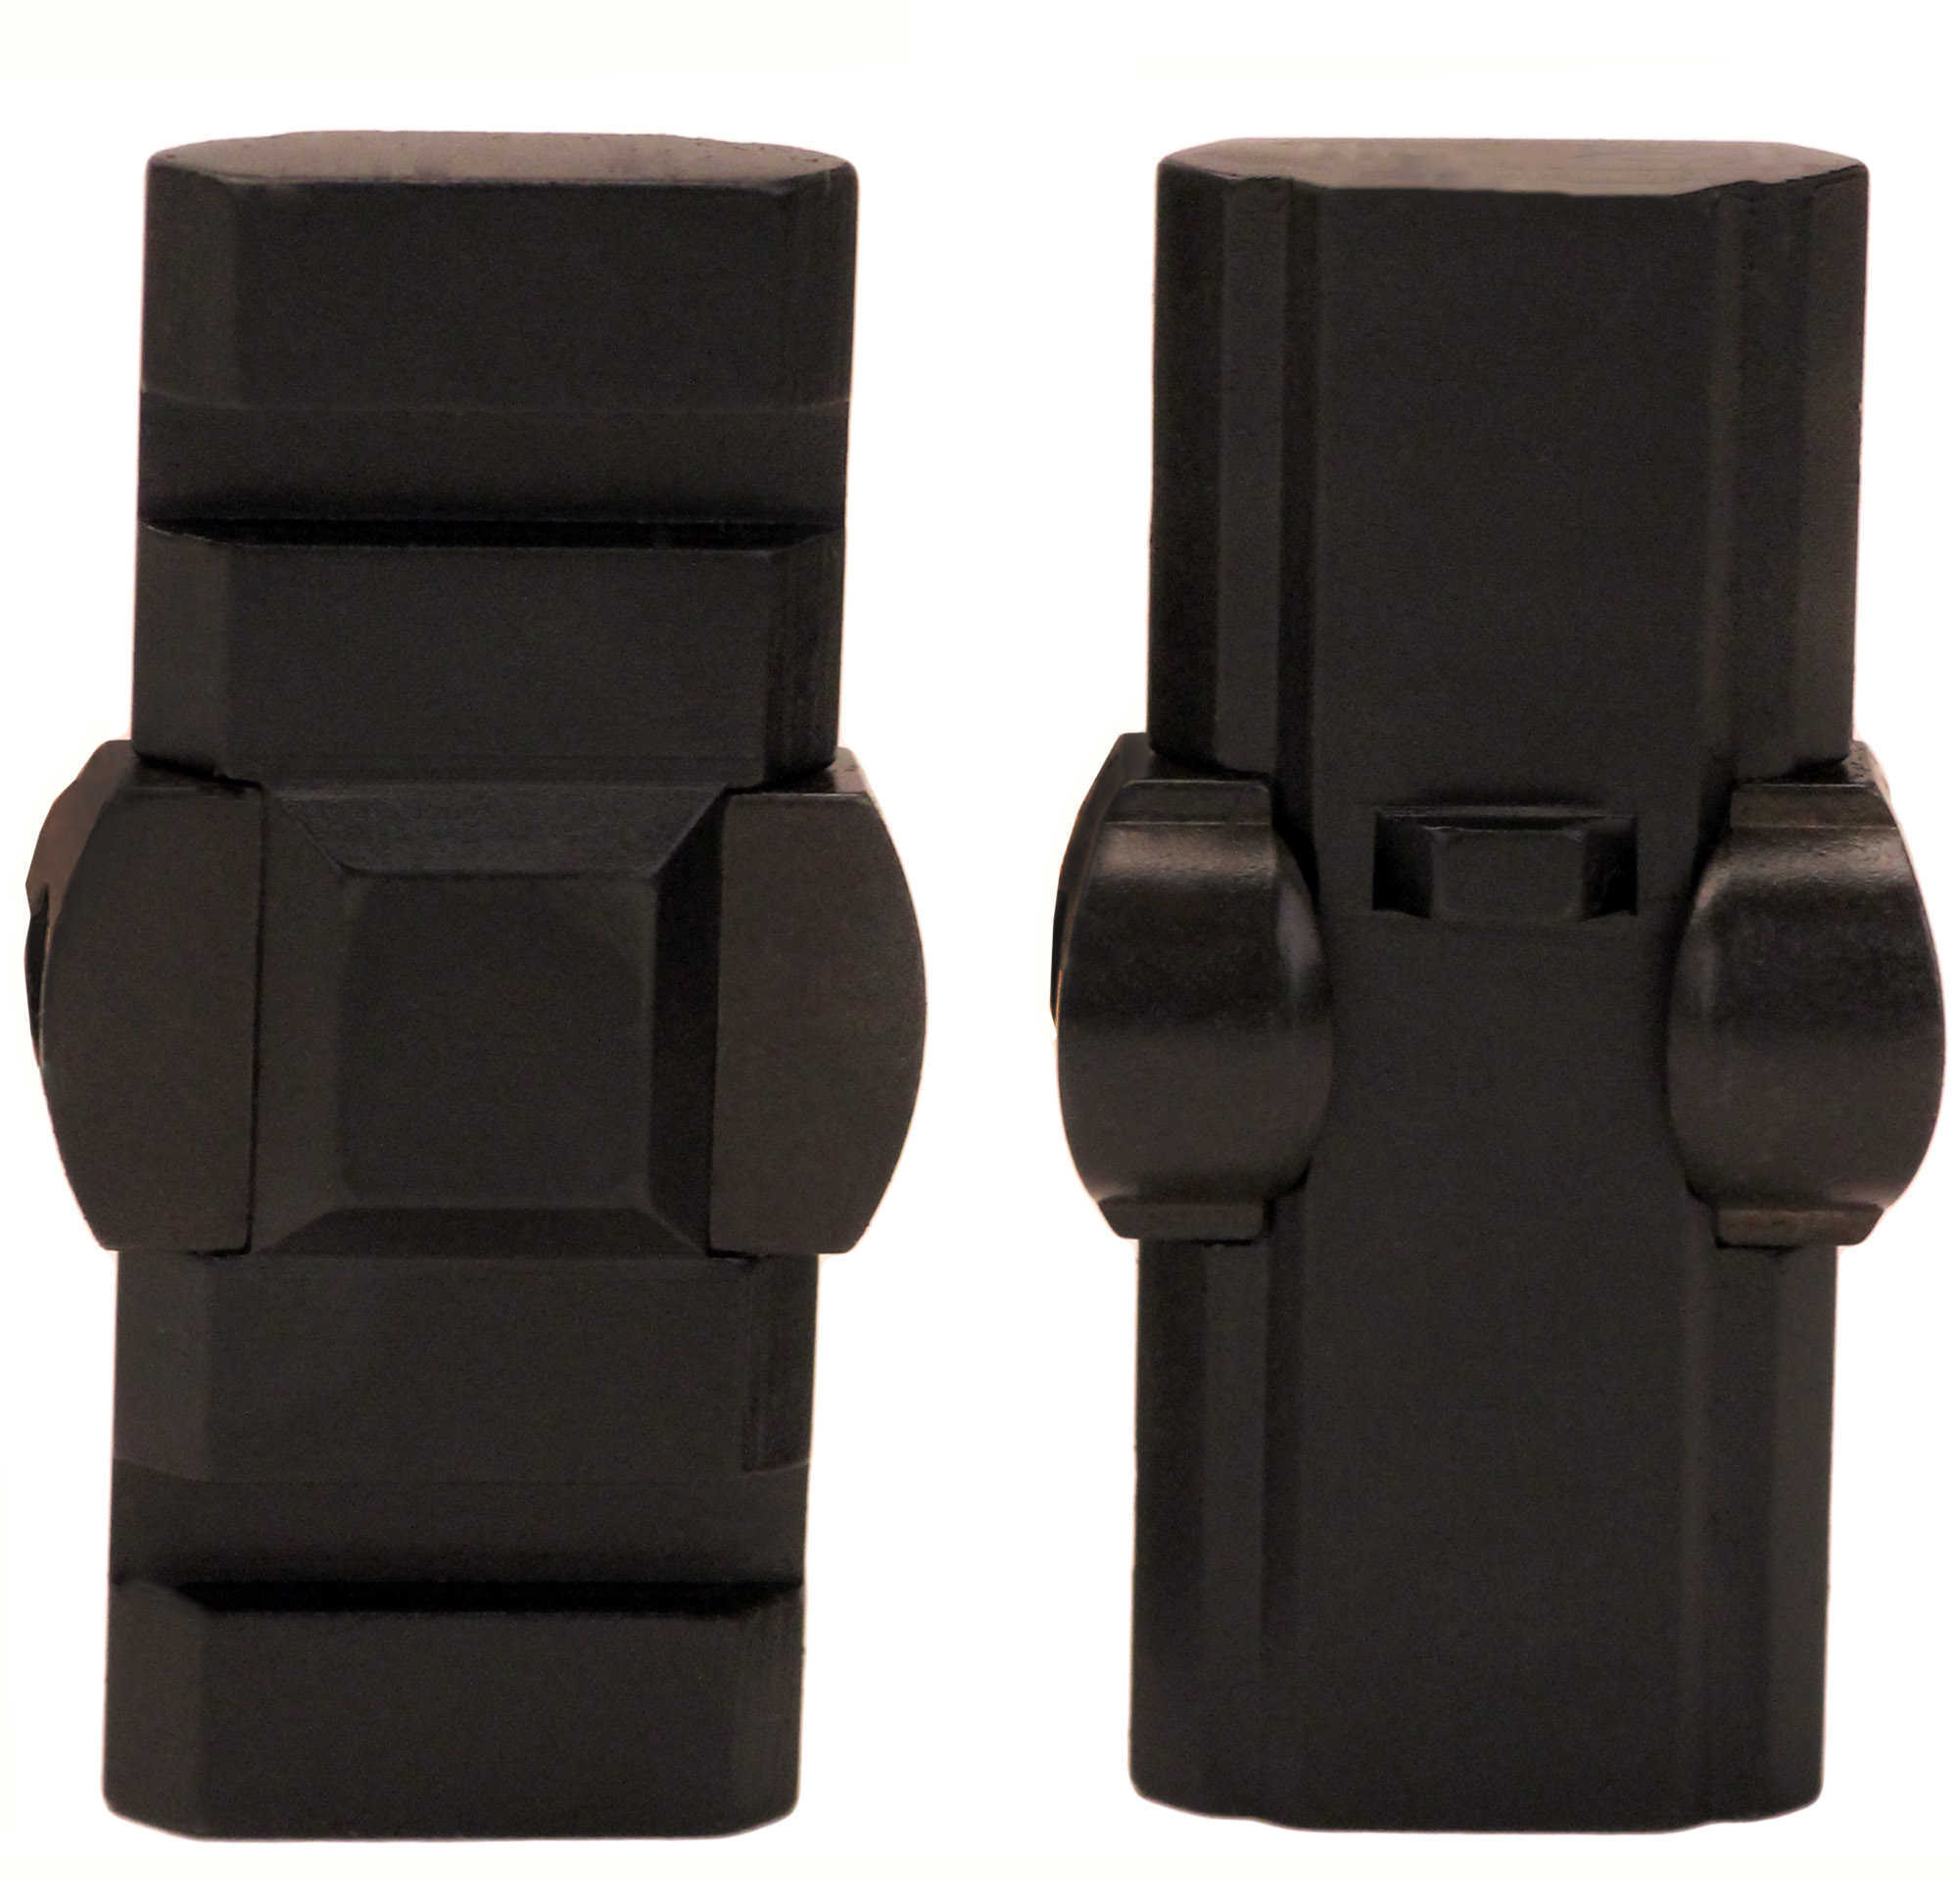 Burris Ruger® To Weaver Adapter For R1 Rifle Black